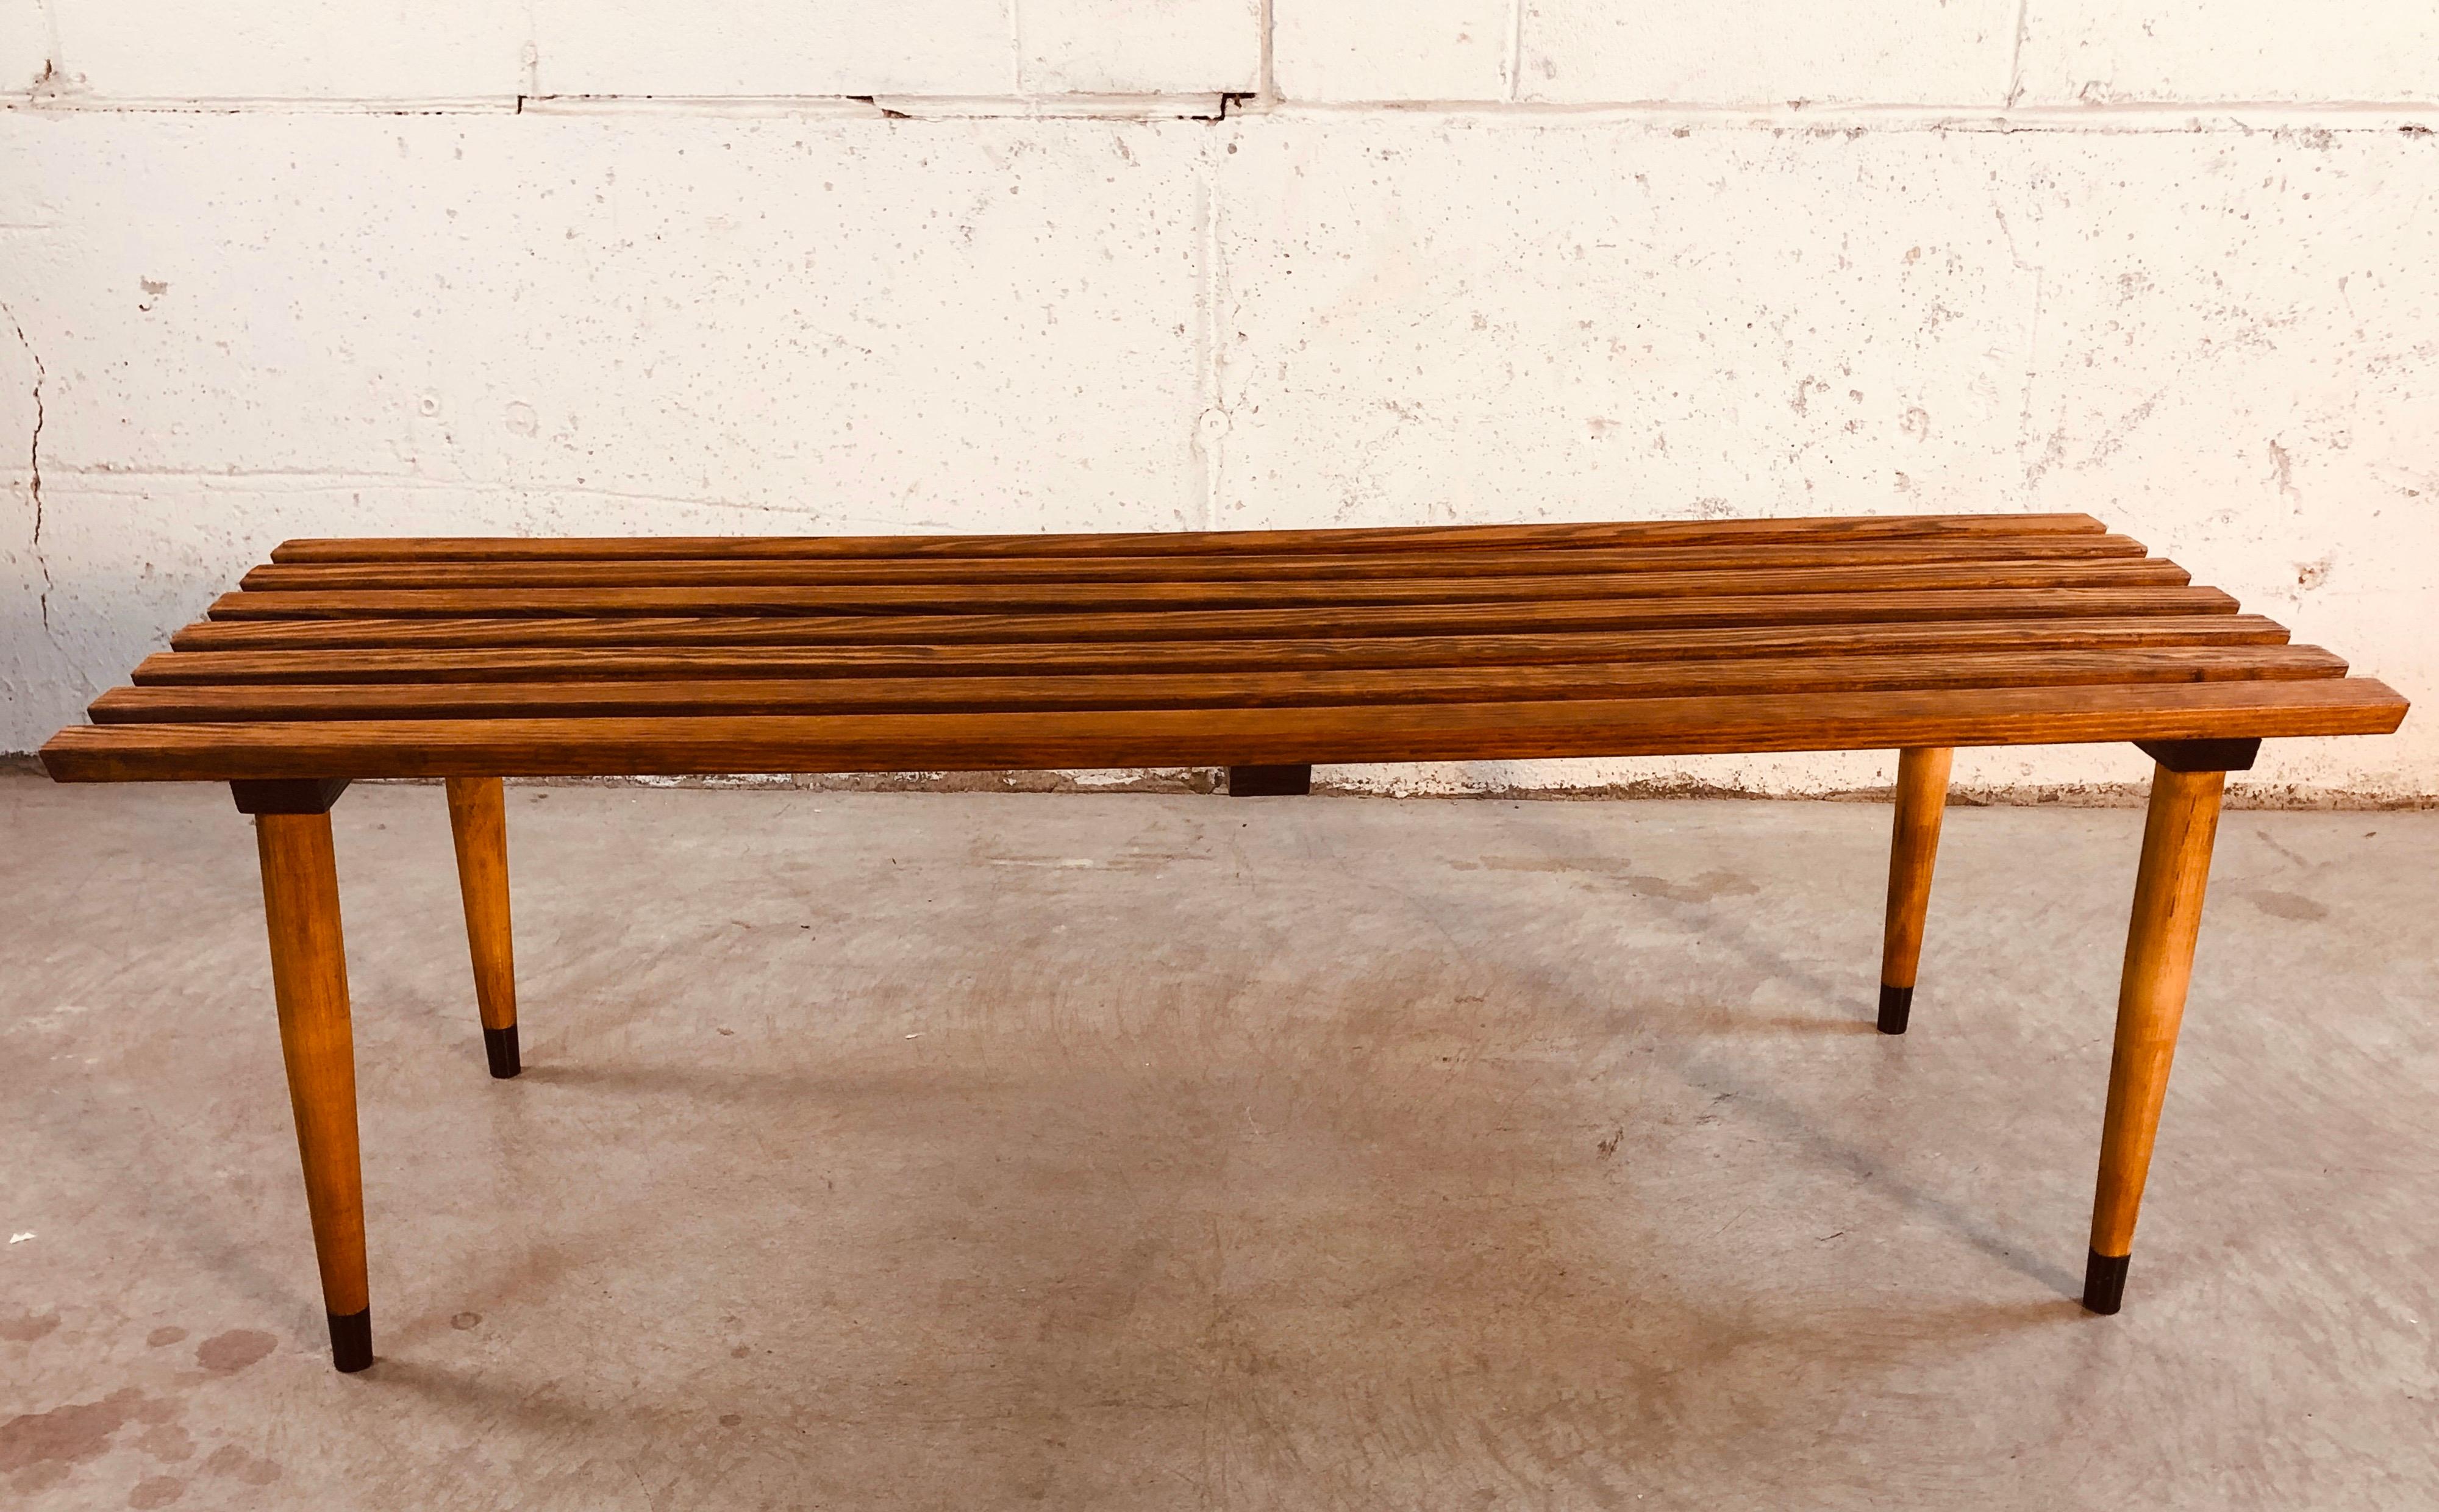 Vintage 1960s slat wood bench coffee table with round wood legs. Fully restored condition. No marks.